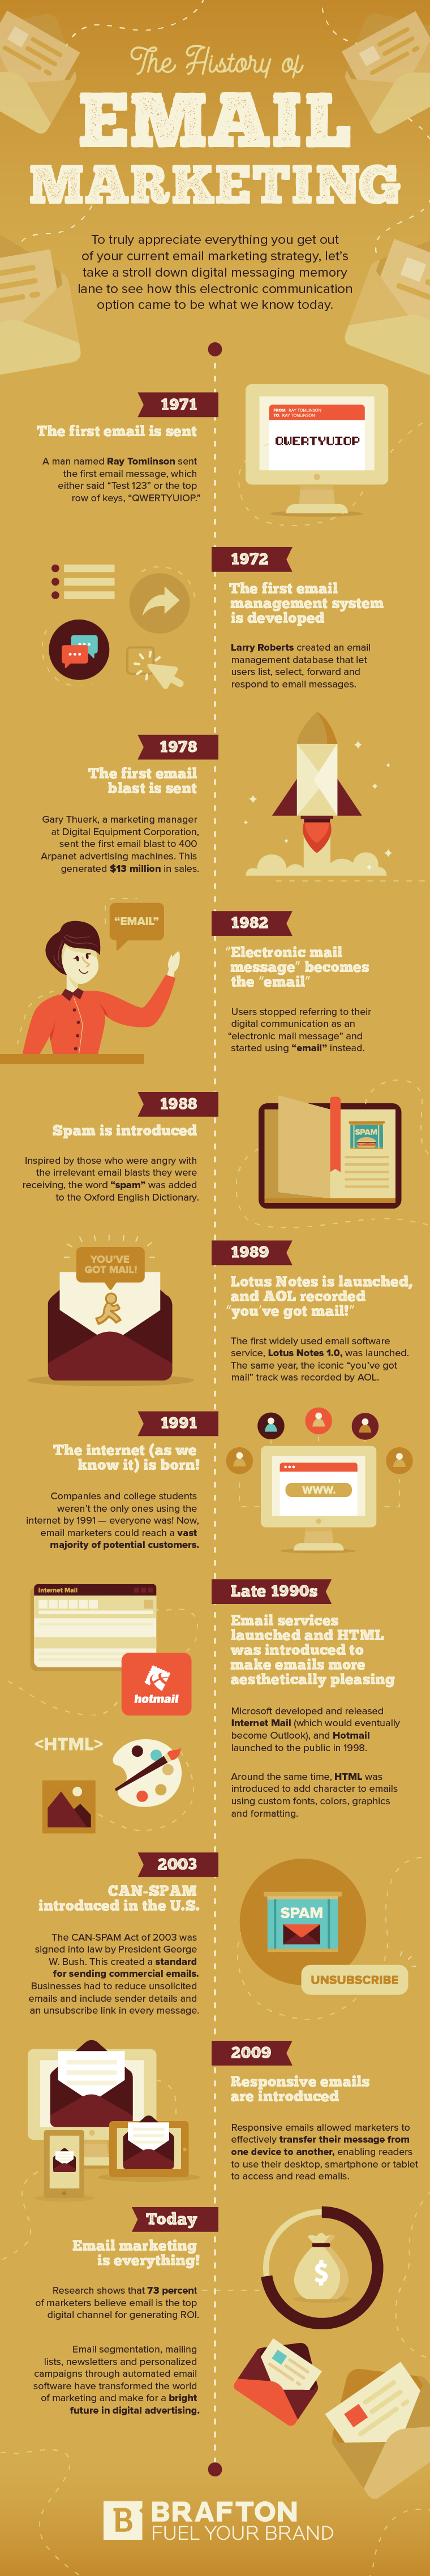 History of email marketing Infographic